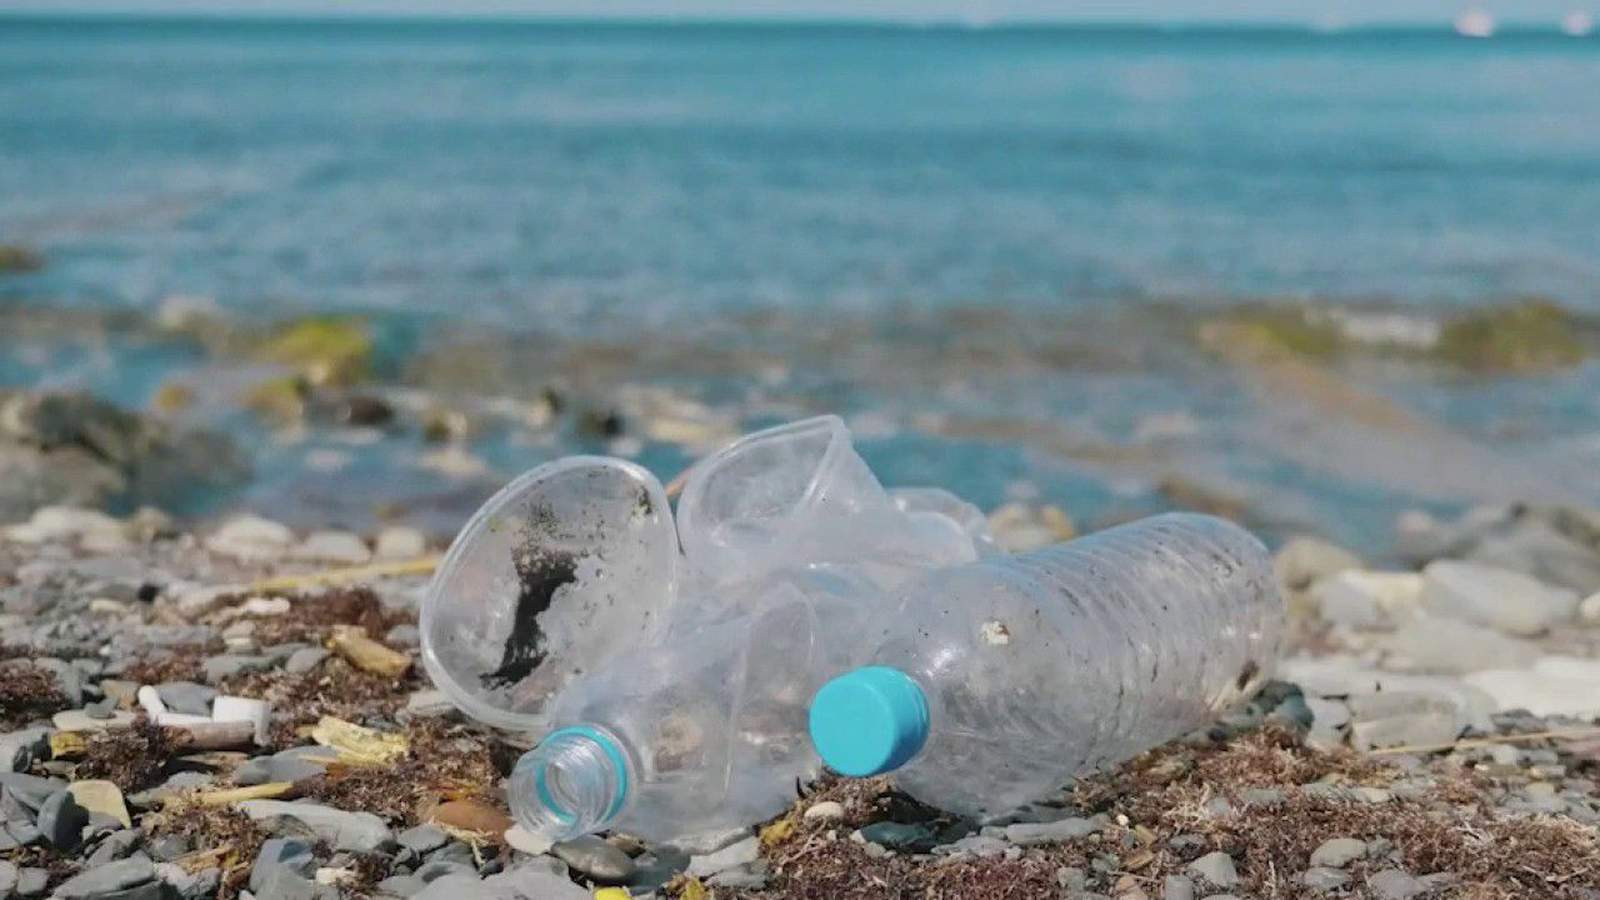 Here’s how to use less plastic in your daily life